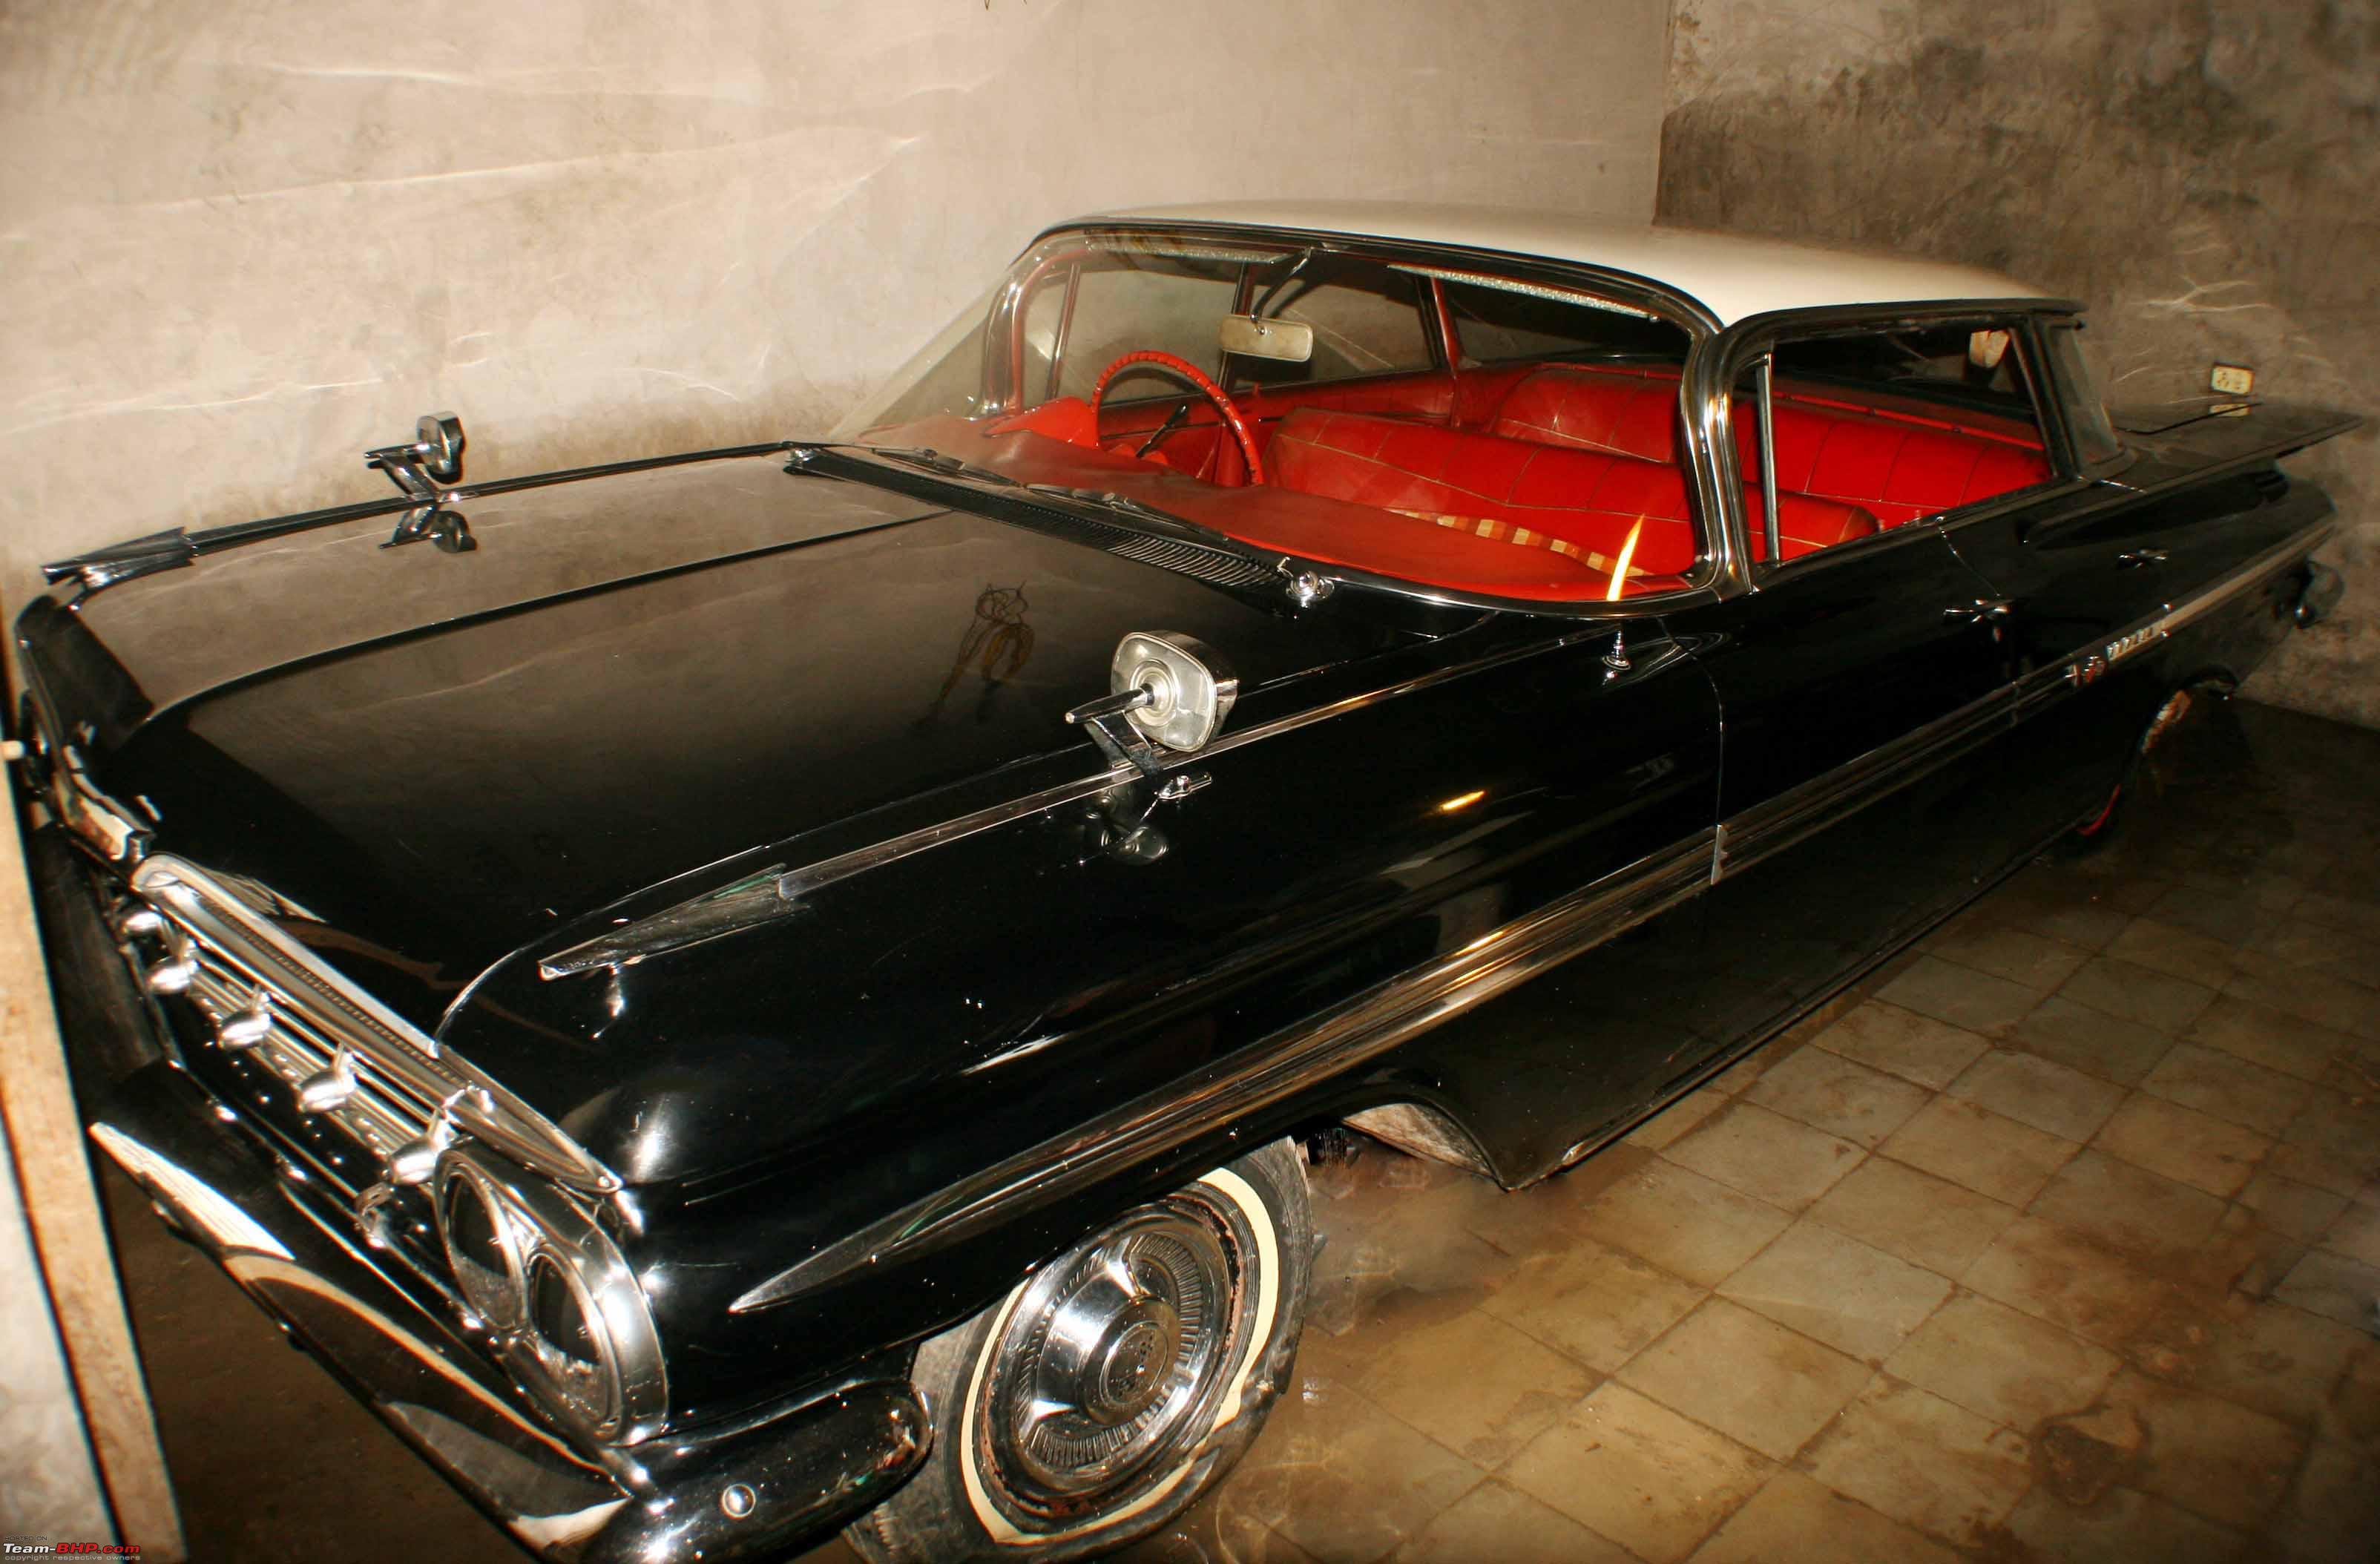 List of Old antique cars for sale in hyderabad with Best Inspiration